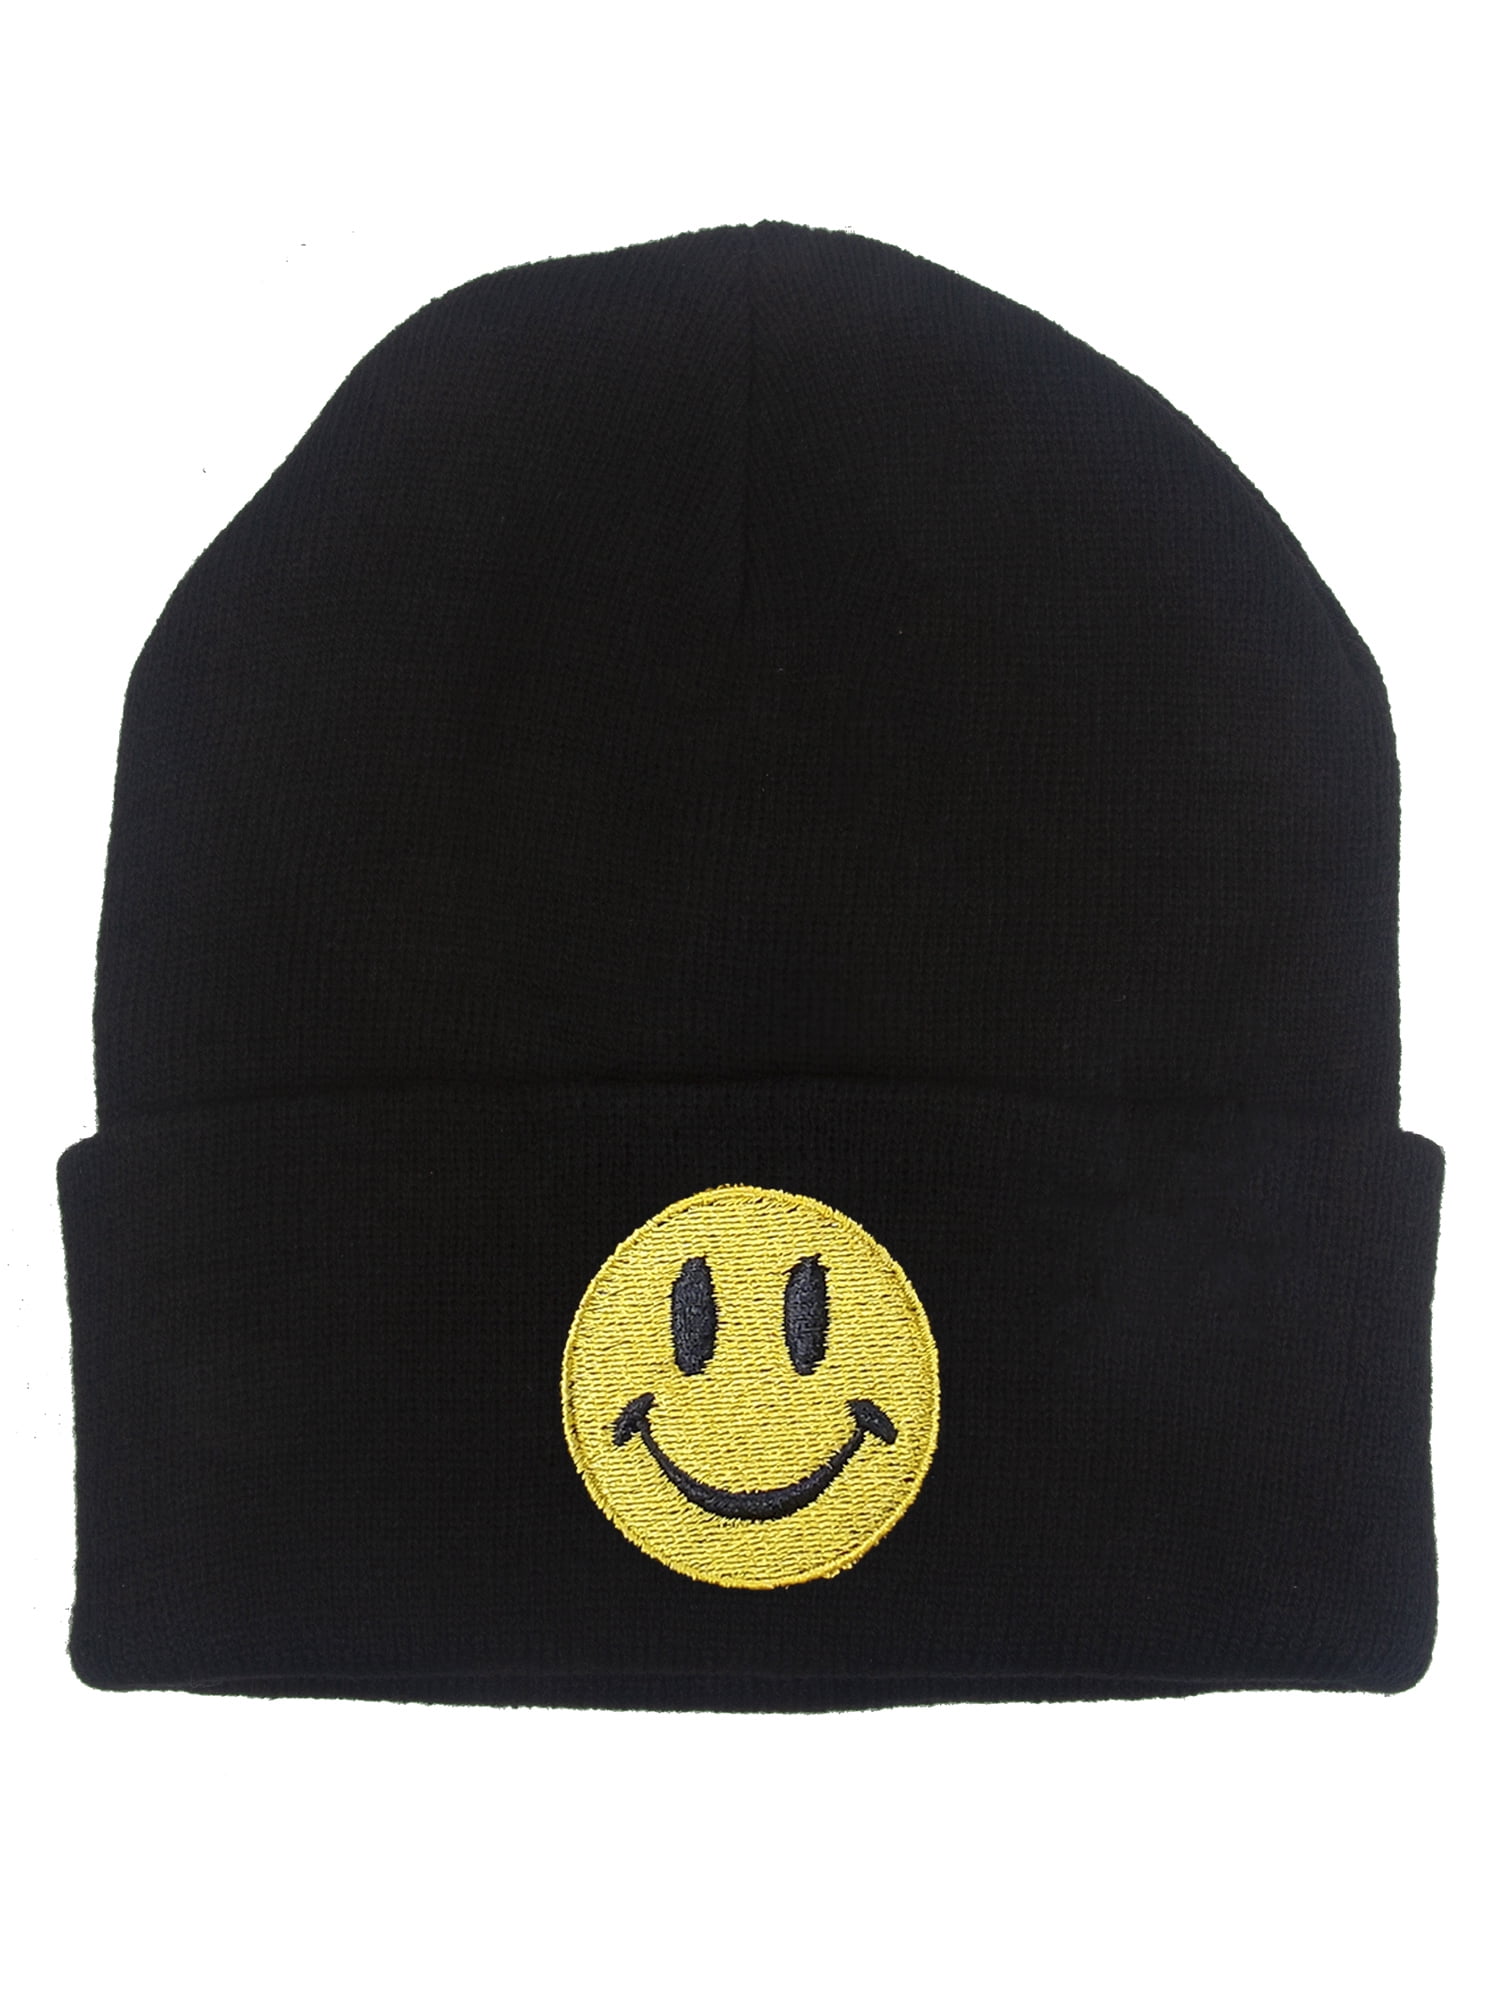 - White Face Beanie - Threads Classic Smile Gravity